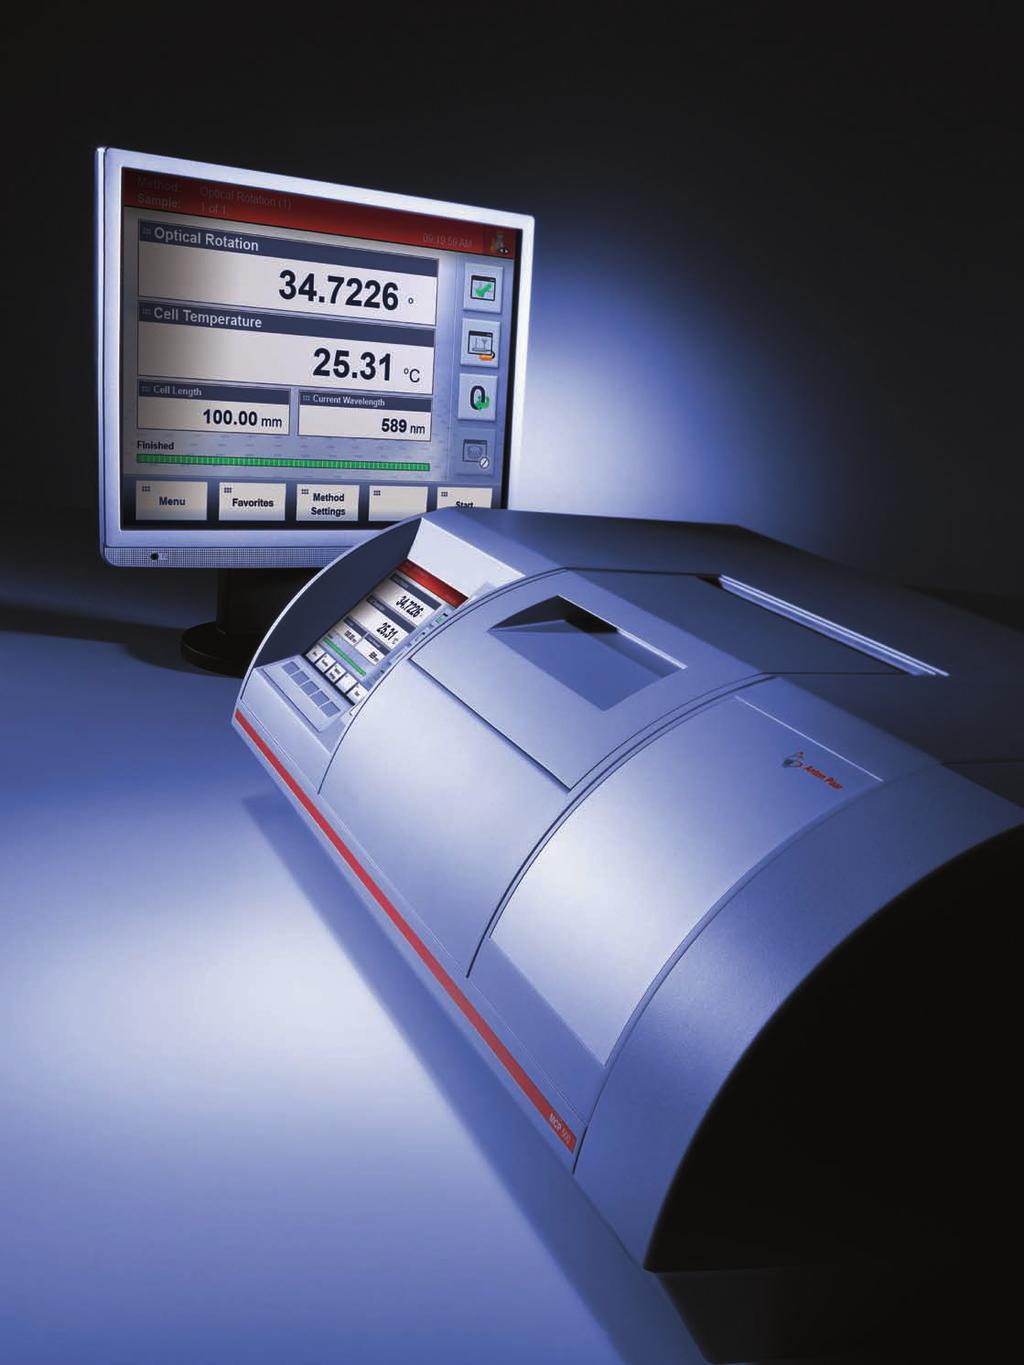 Making Work Easier for the User MCP 300/500 has been designed with the user in mind. The built-in software supports intuitive menu navigation and the user is guided through calibration step-by-step.